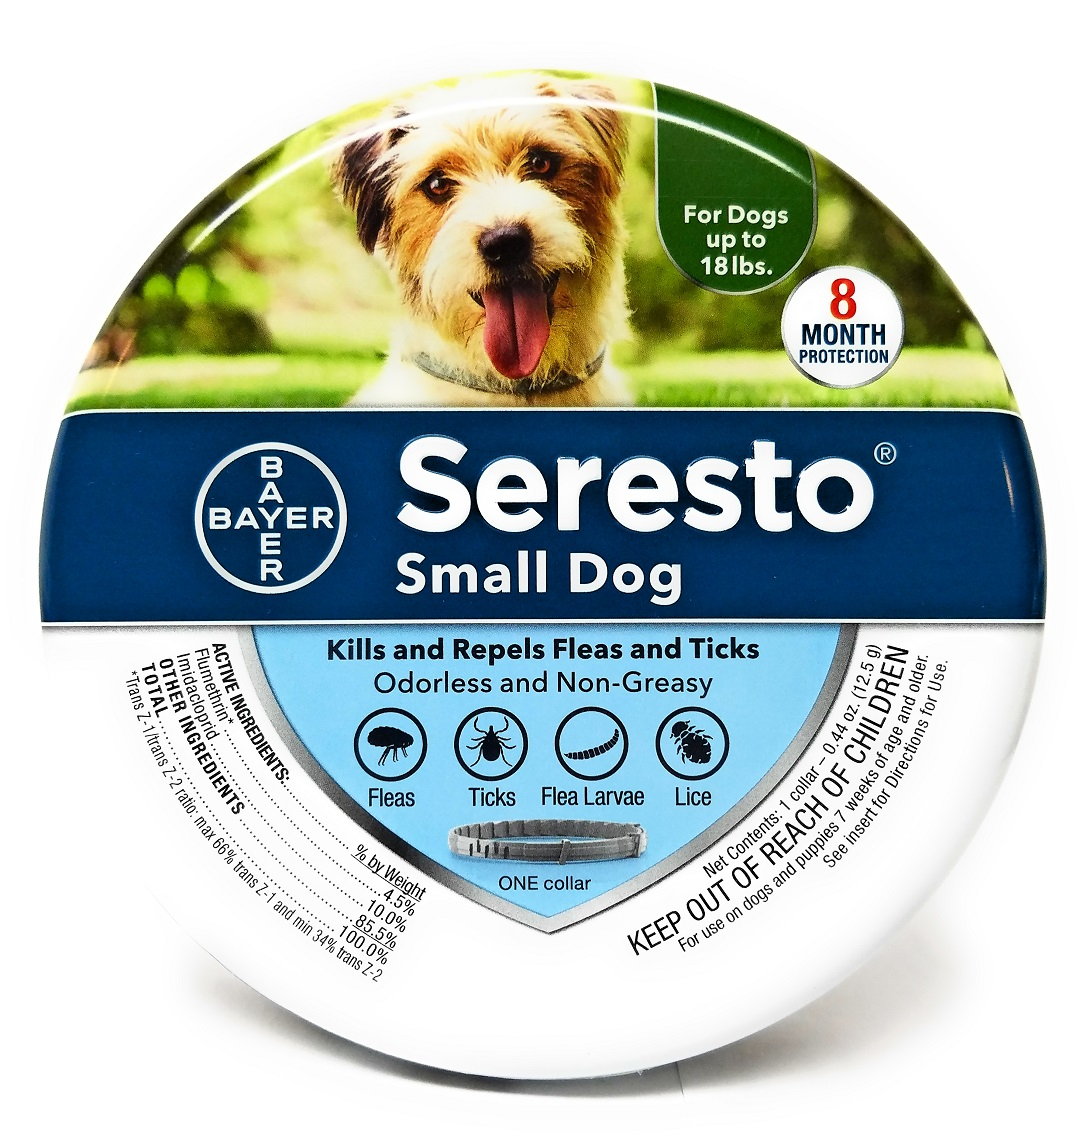 vet-approved-rx-seresto-collar-for-small-dog-upt-to-18lbs